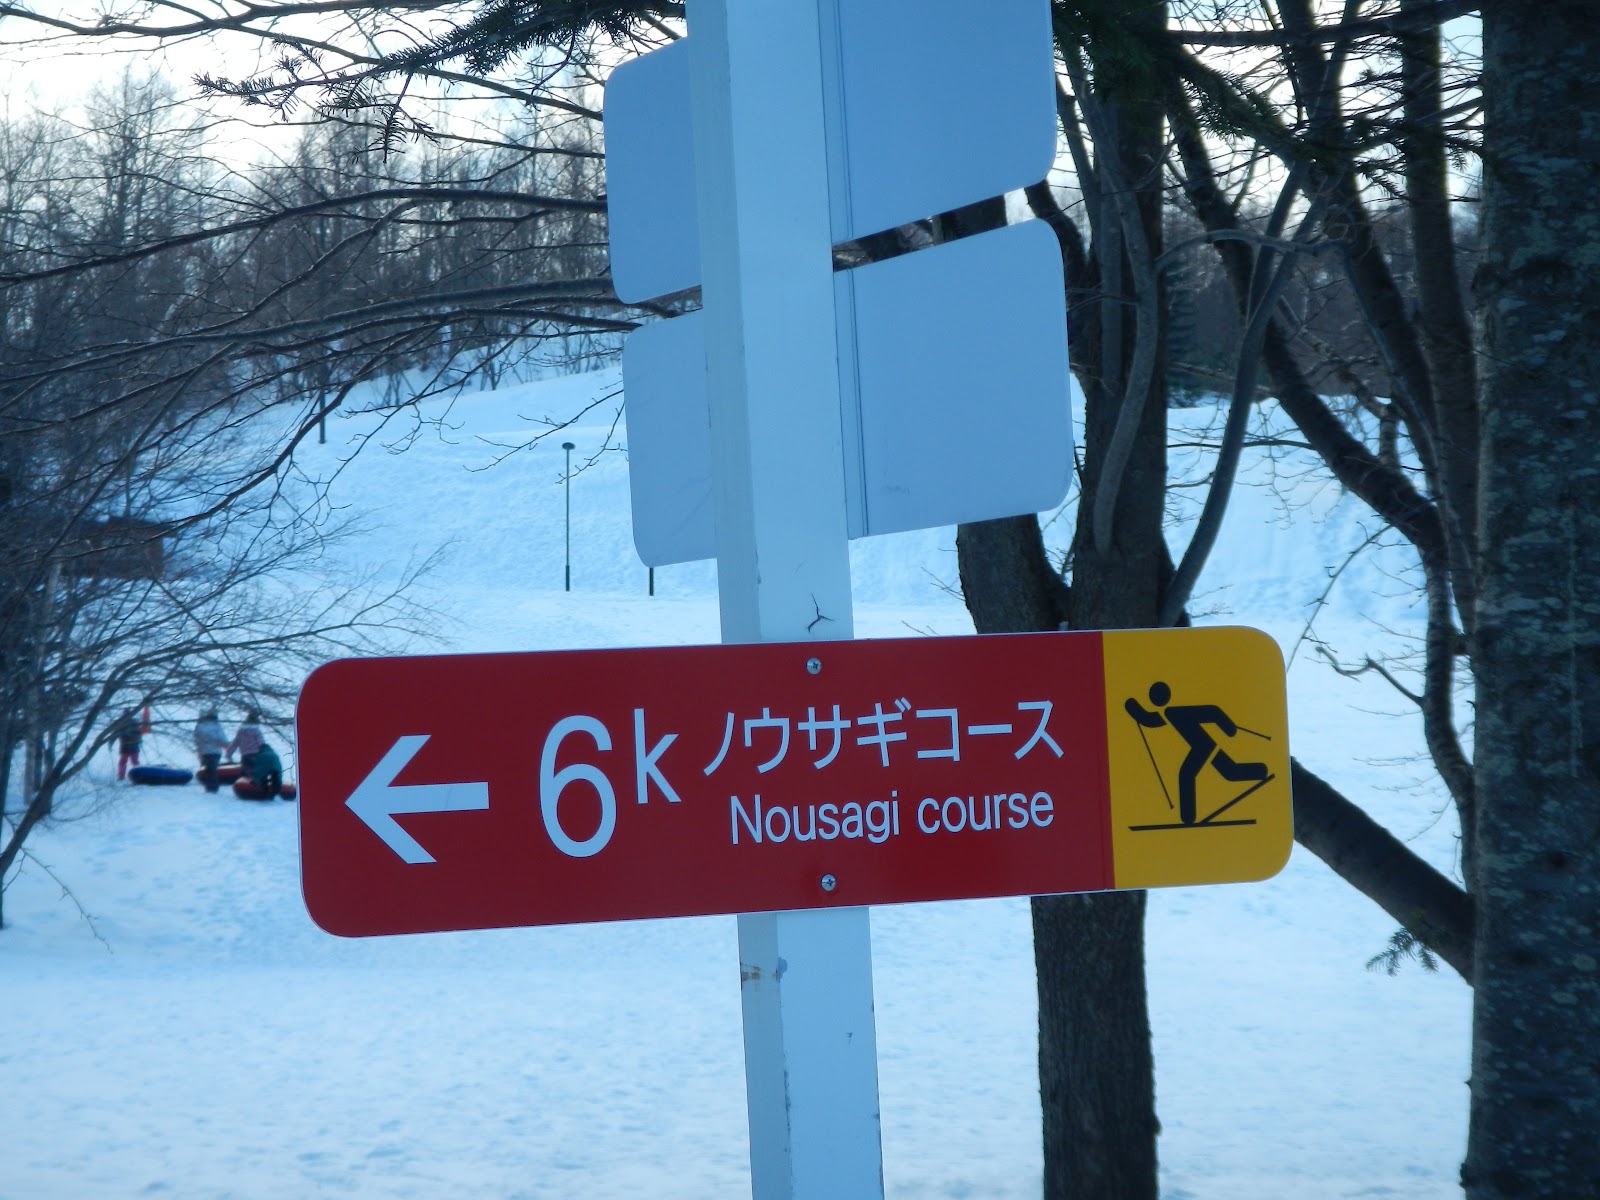 Kyle and Bre in Japan: Cross-country skiing1600 x 1200